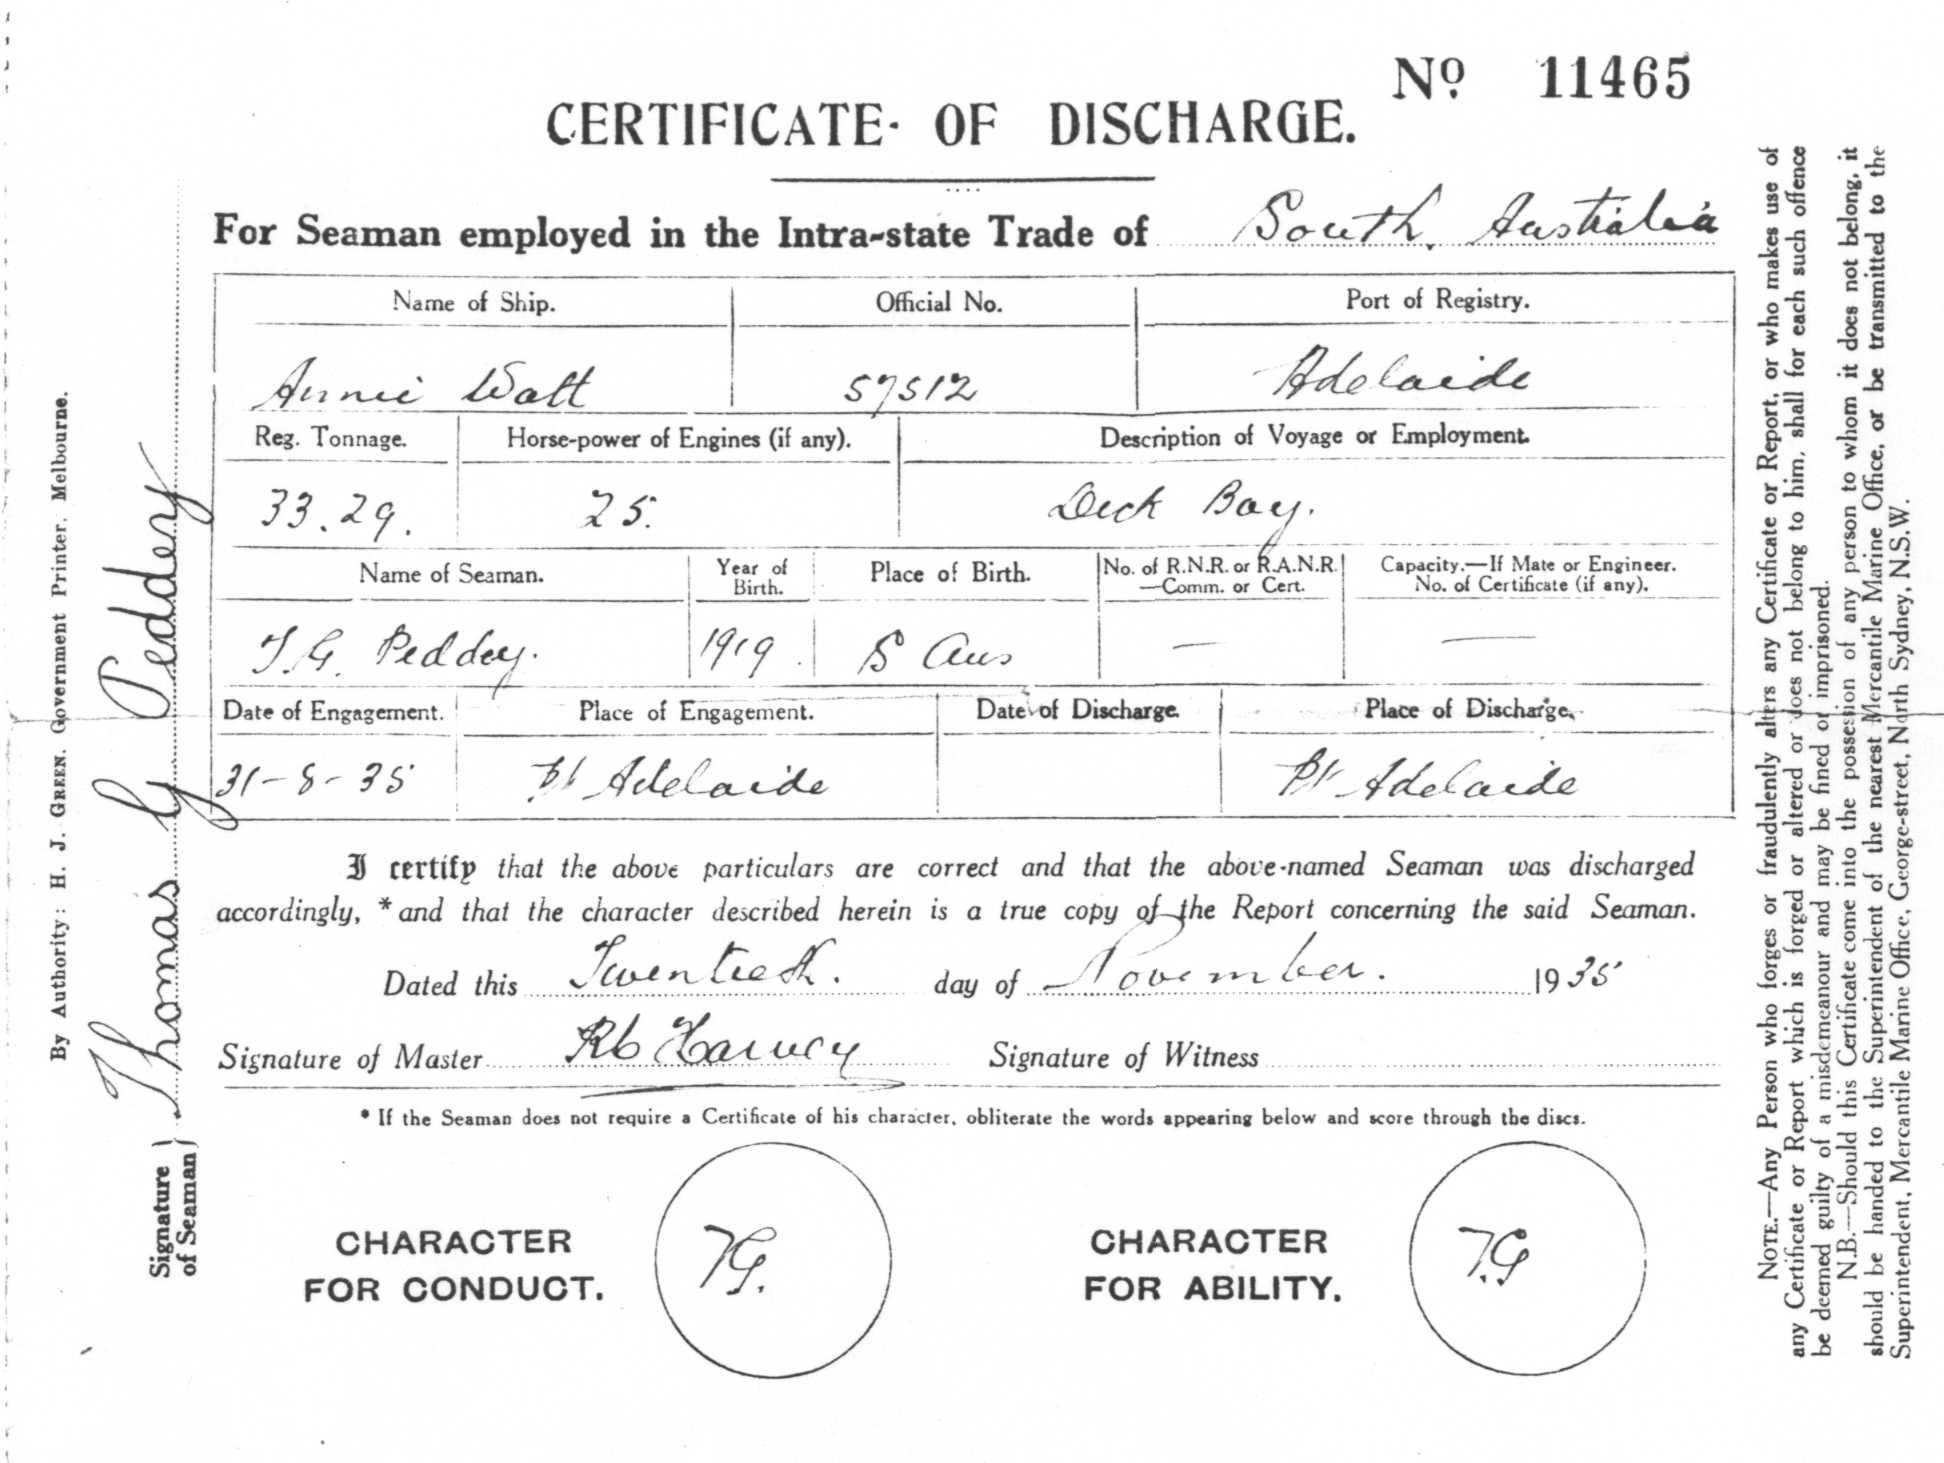 This image shows a certificate of discharge of T.G. Peddey from "Annie Watt" on 20 - 11 - 1935 by captain R.C. Harvey.